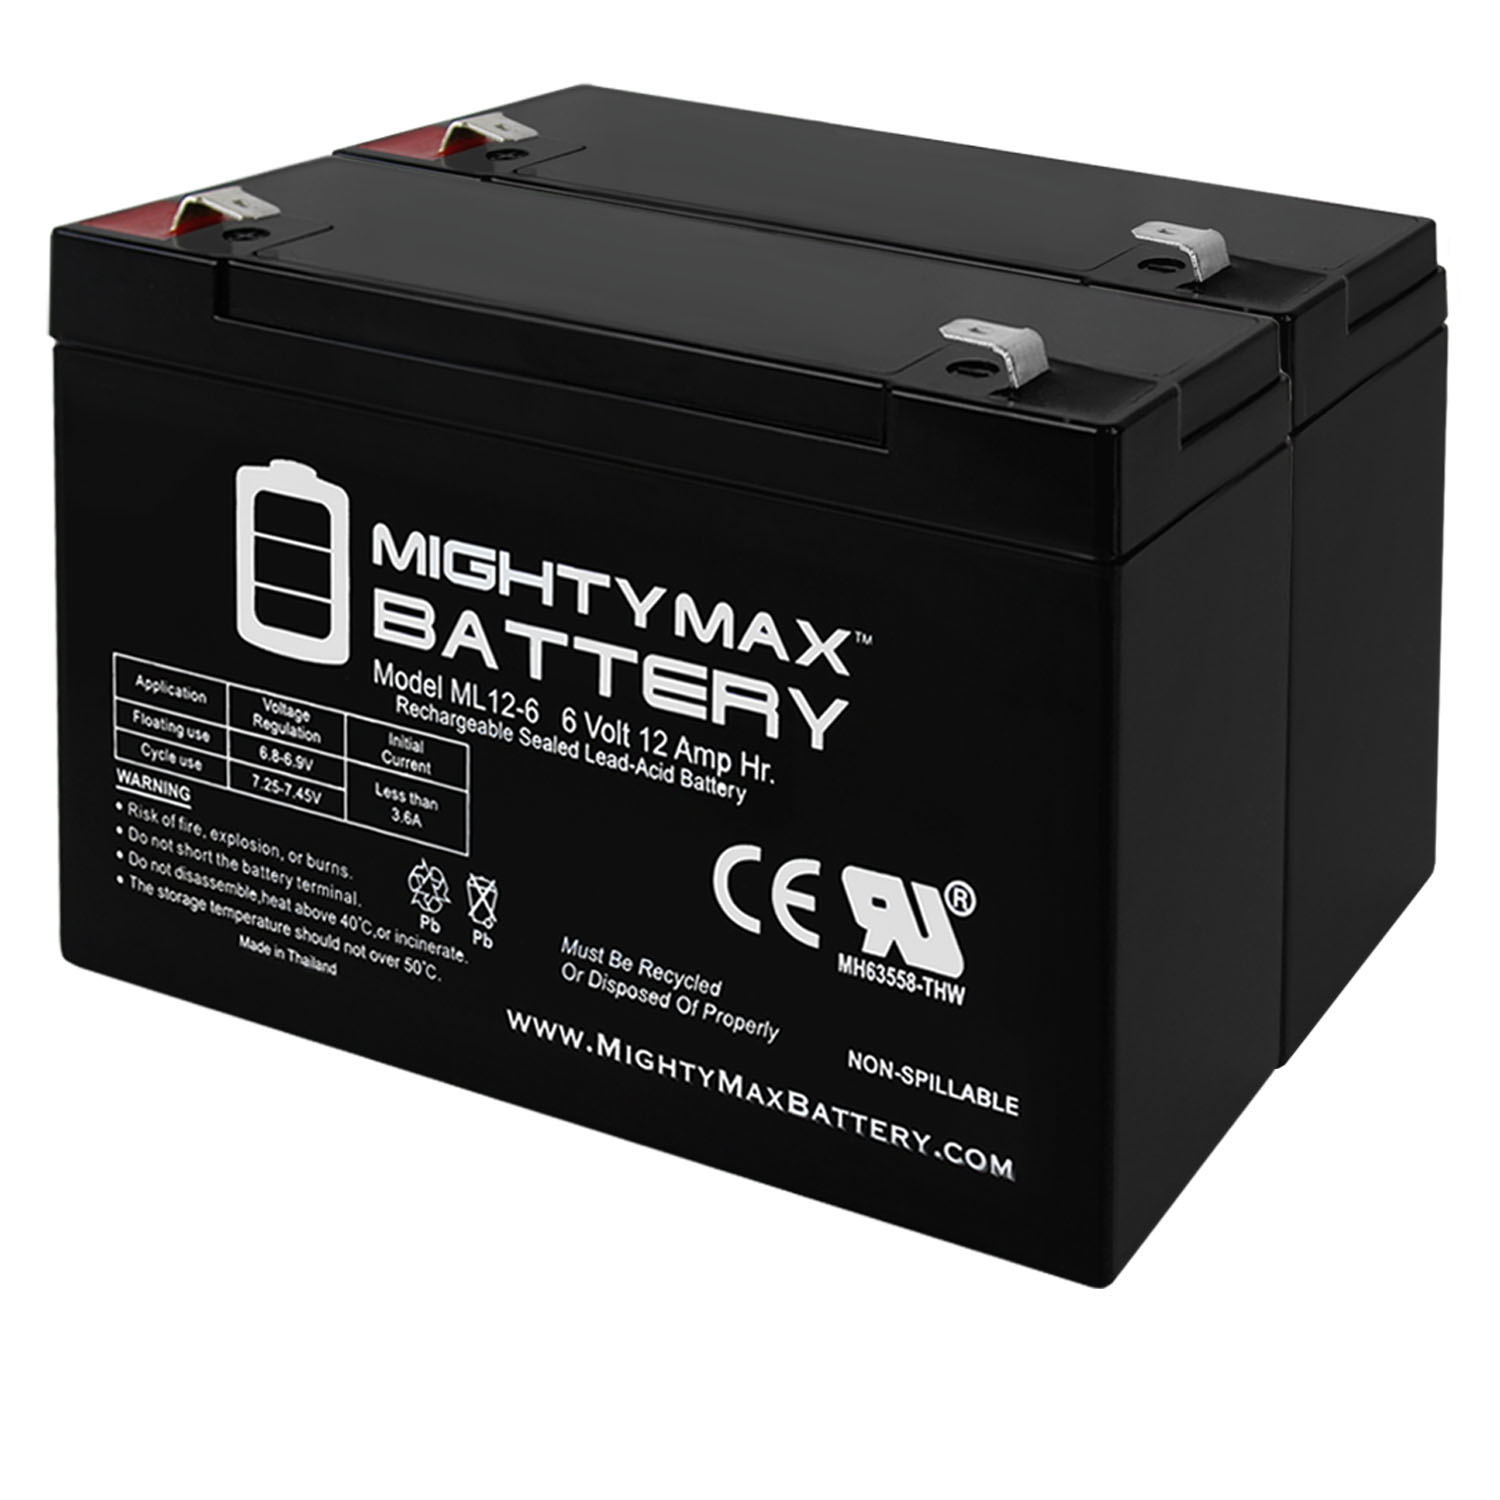 6V 12AH F2 Replacement Battery for Elpower EP675C - 2 Pack